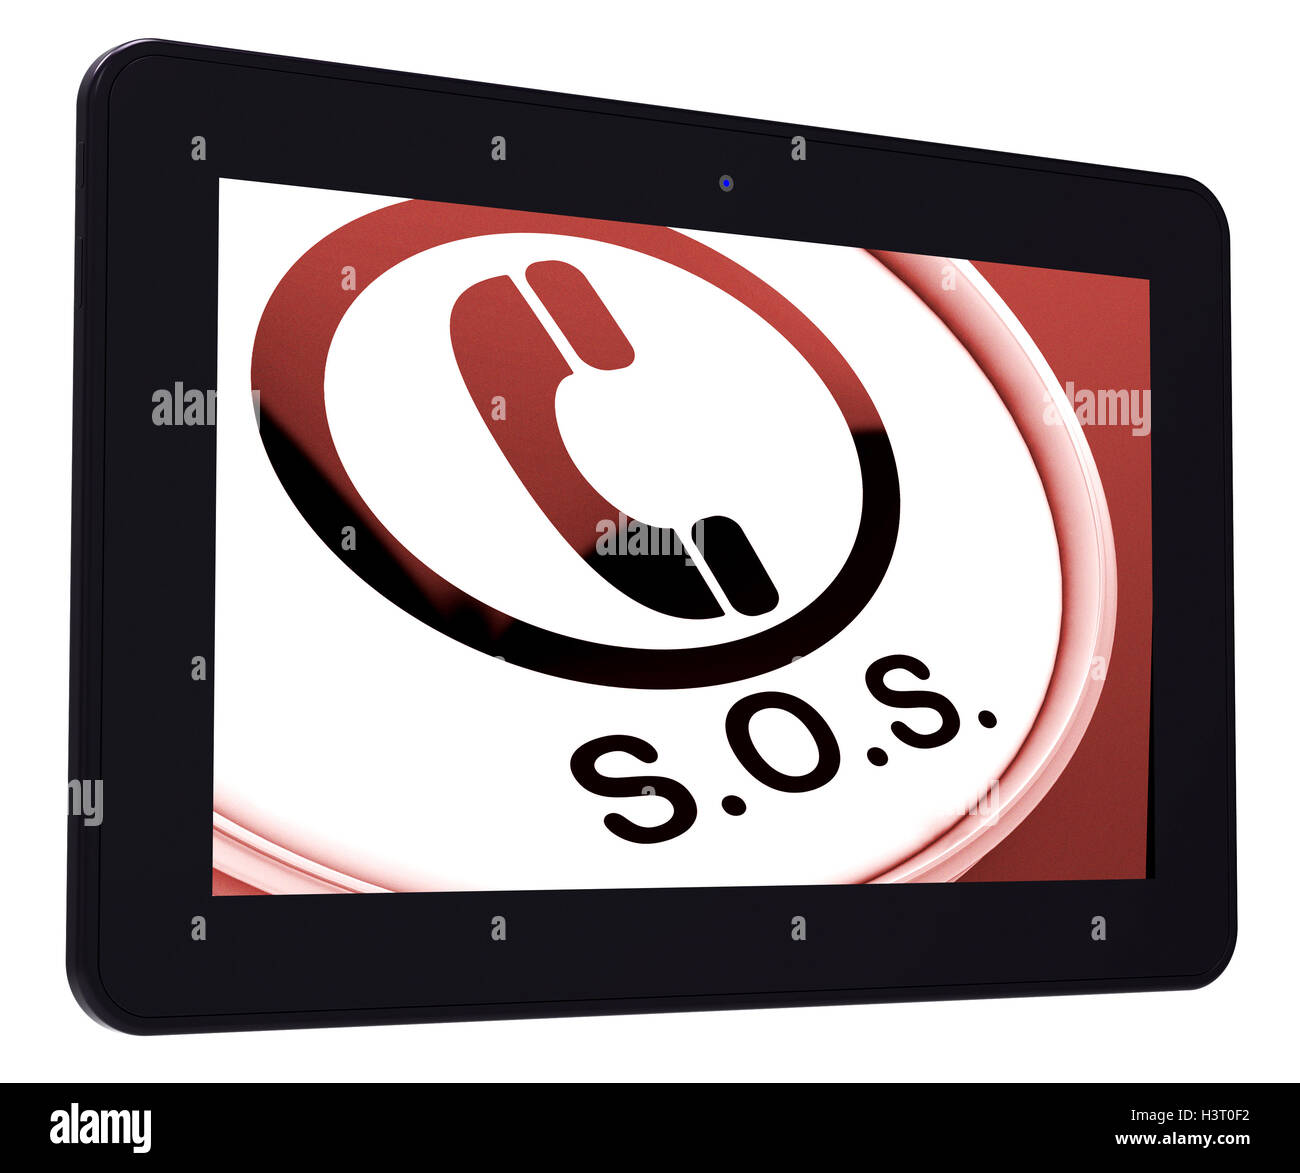 SOS Tablet Shows Call For Urgent Help Stock Photo